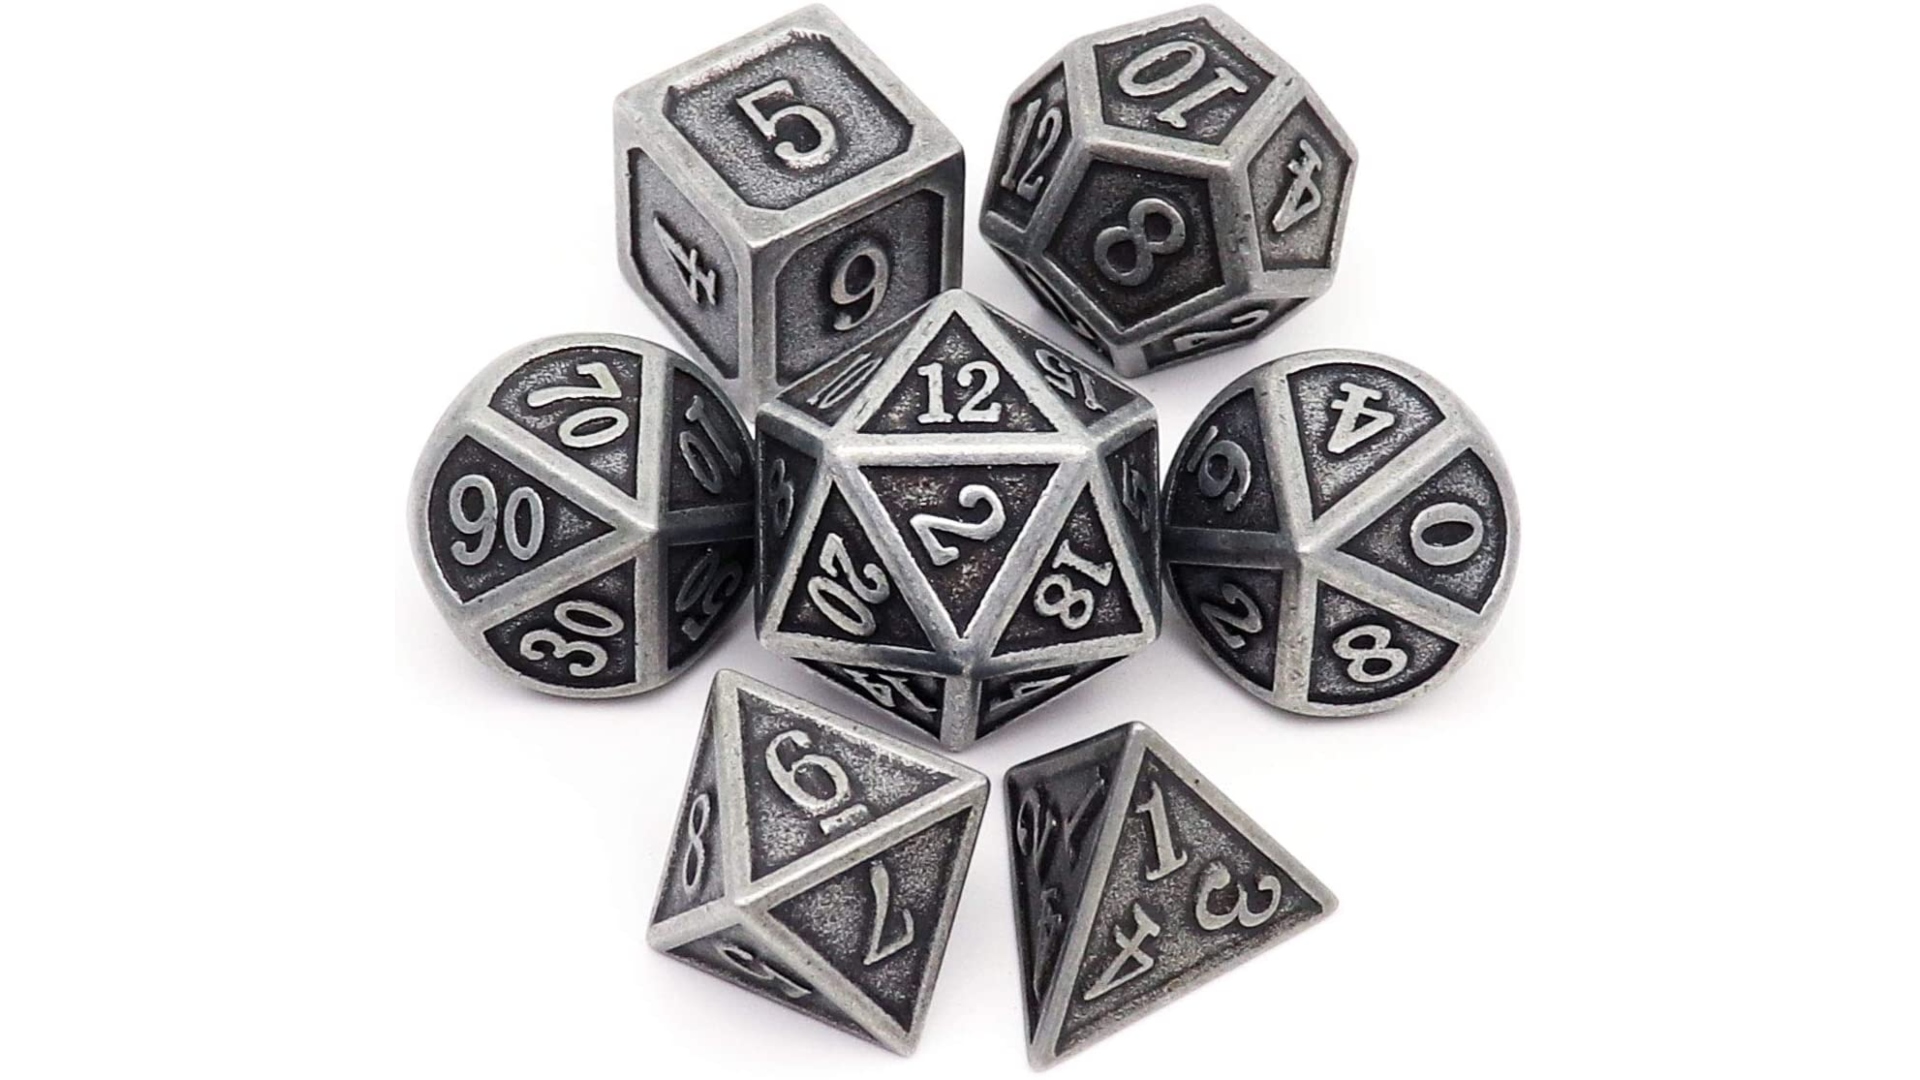 DnD gifts - An antique Dungeons and Dragons dice set. Every type of dice is present.